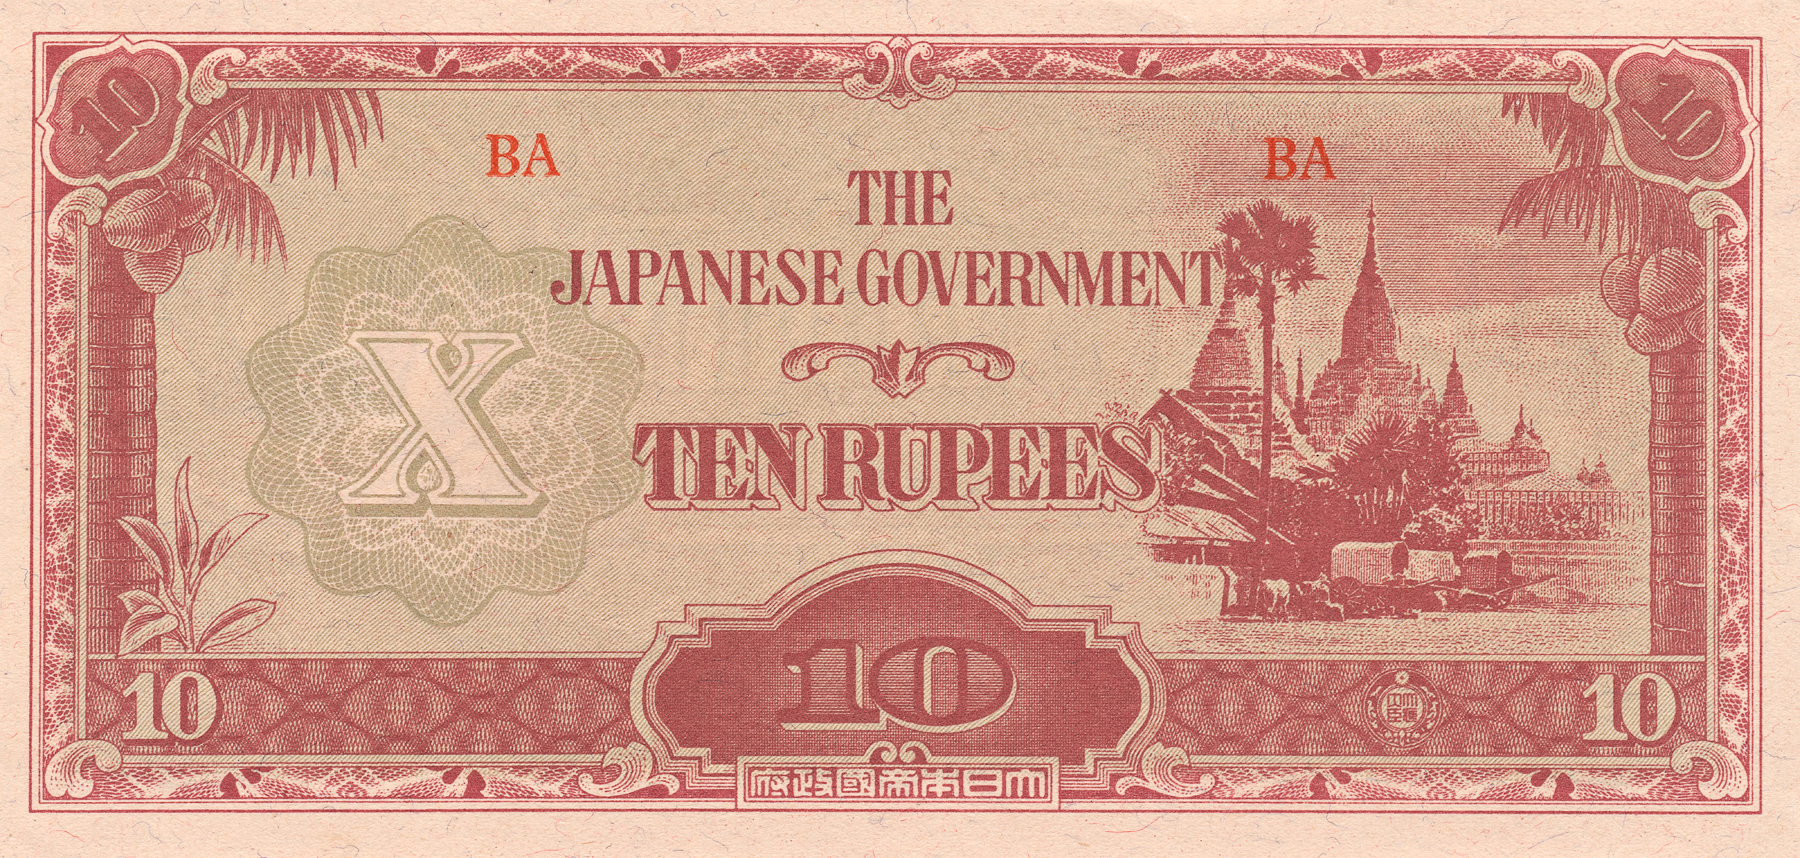 Vintage banknote - japanese government photo